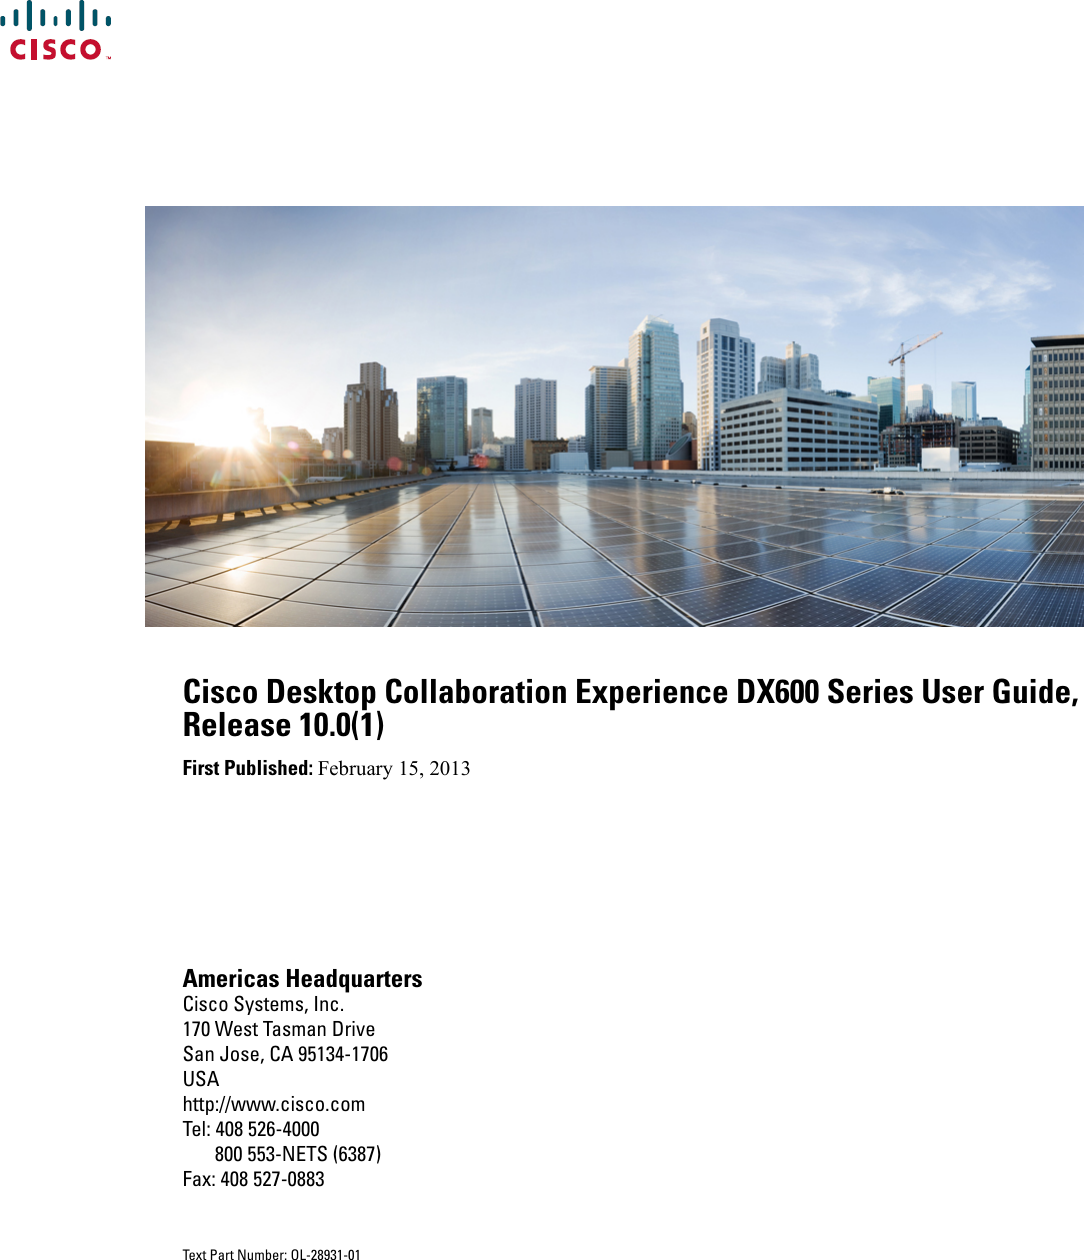 Cisco Desktop Collaboration Experience DX600 Series User Guide,Release 10.0(1)First Published: February 15, 2013Americas HeadquartersCisco Systems, Inc.170 West Tasman DriveSan Jose, CA 95134-1706USAhttp://www.cisco.comTel: 408 526-4000       800 553-NETS (6387)Fax: 408 527-0883Text Part Number: OL-28931-01